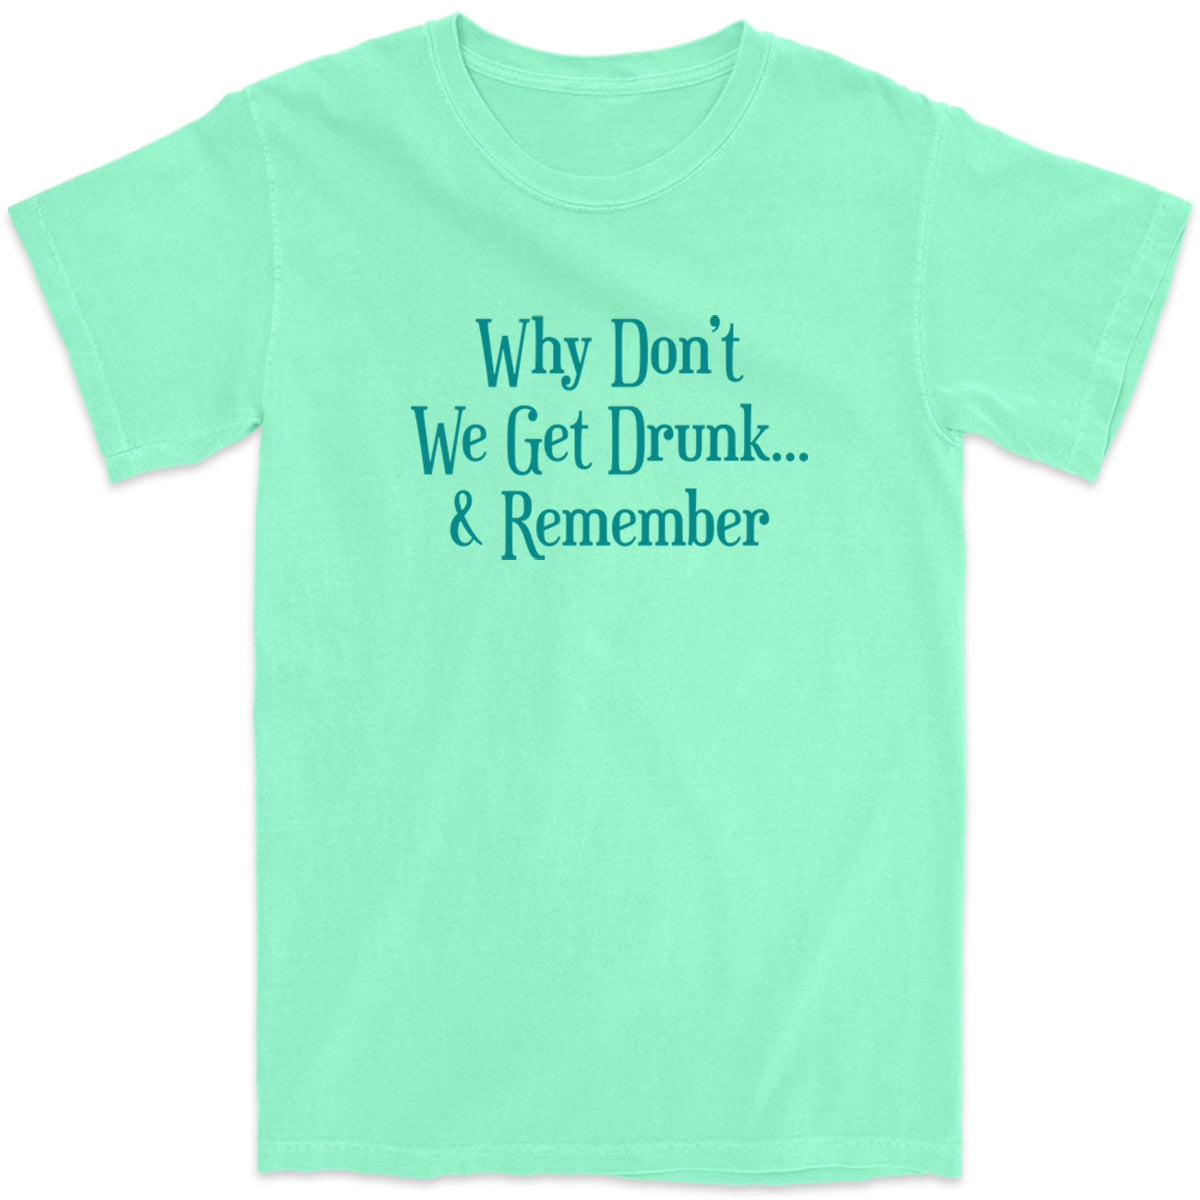 Jimmy Buffett inspired Why Don't We Get Drunk...& Remember Donation T-Shirt Island Reef